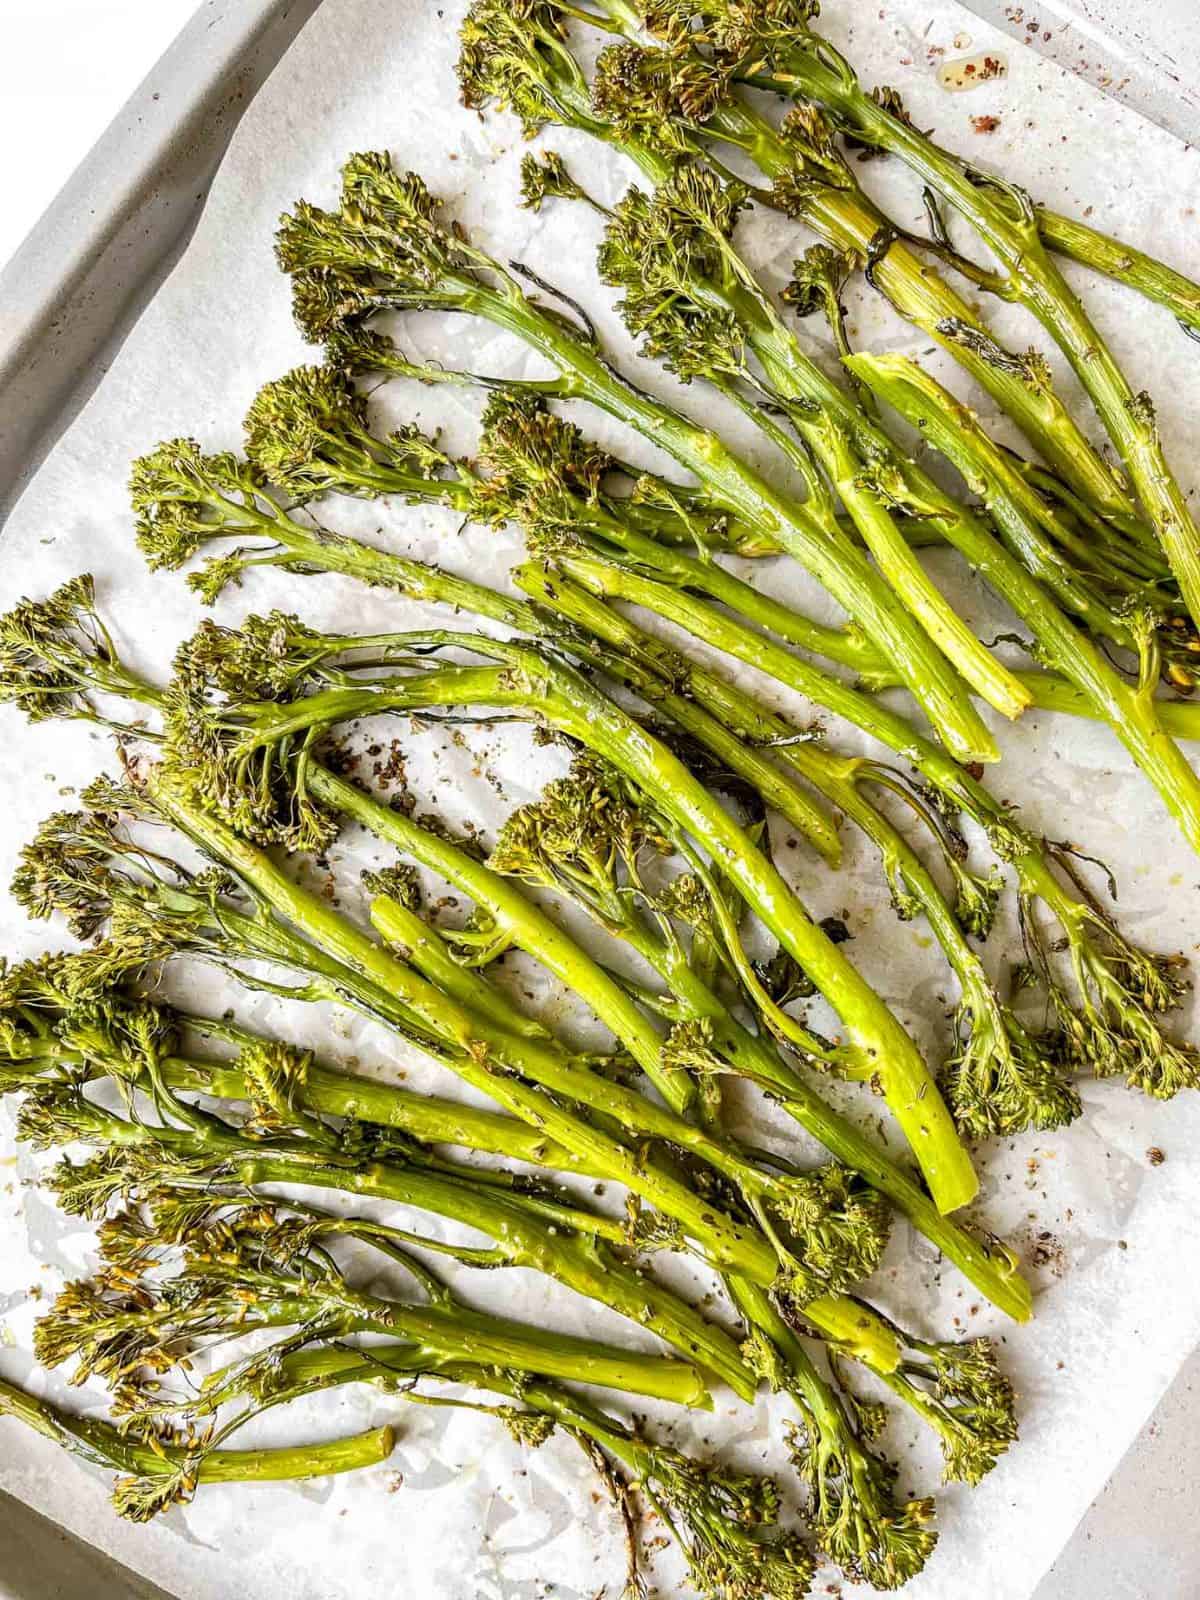 tenderstem broccoli on a lined baking tray.